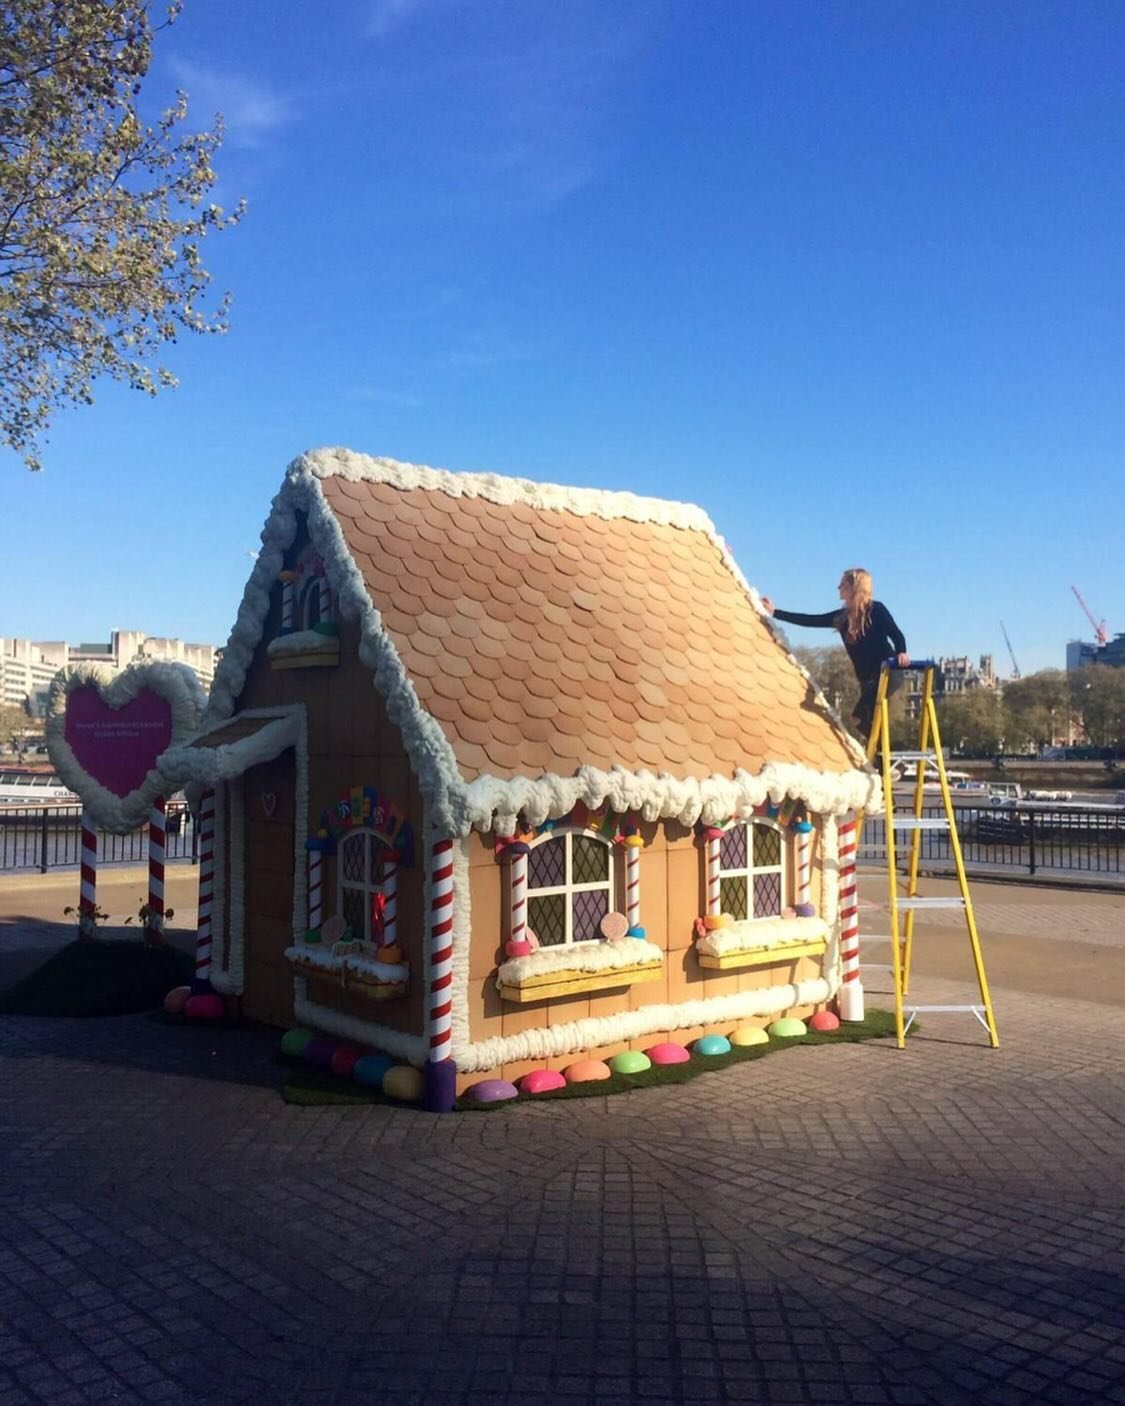 One from the archives today. This has to be our greatest, and most challenging project. 

This gingerbread house stood at roughly 3 metres tall, and was installed on the Southbank to celebrate the opening of @shreksadventure 9 years ago.

This ginger